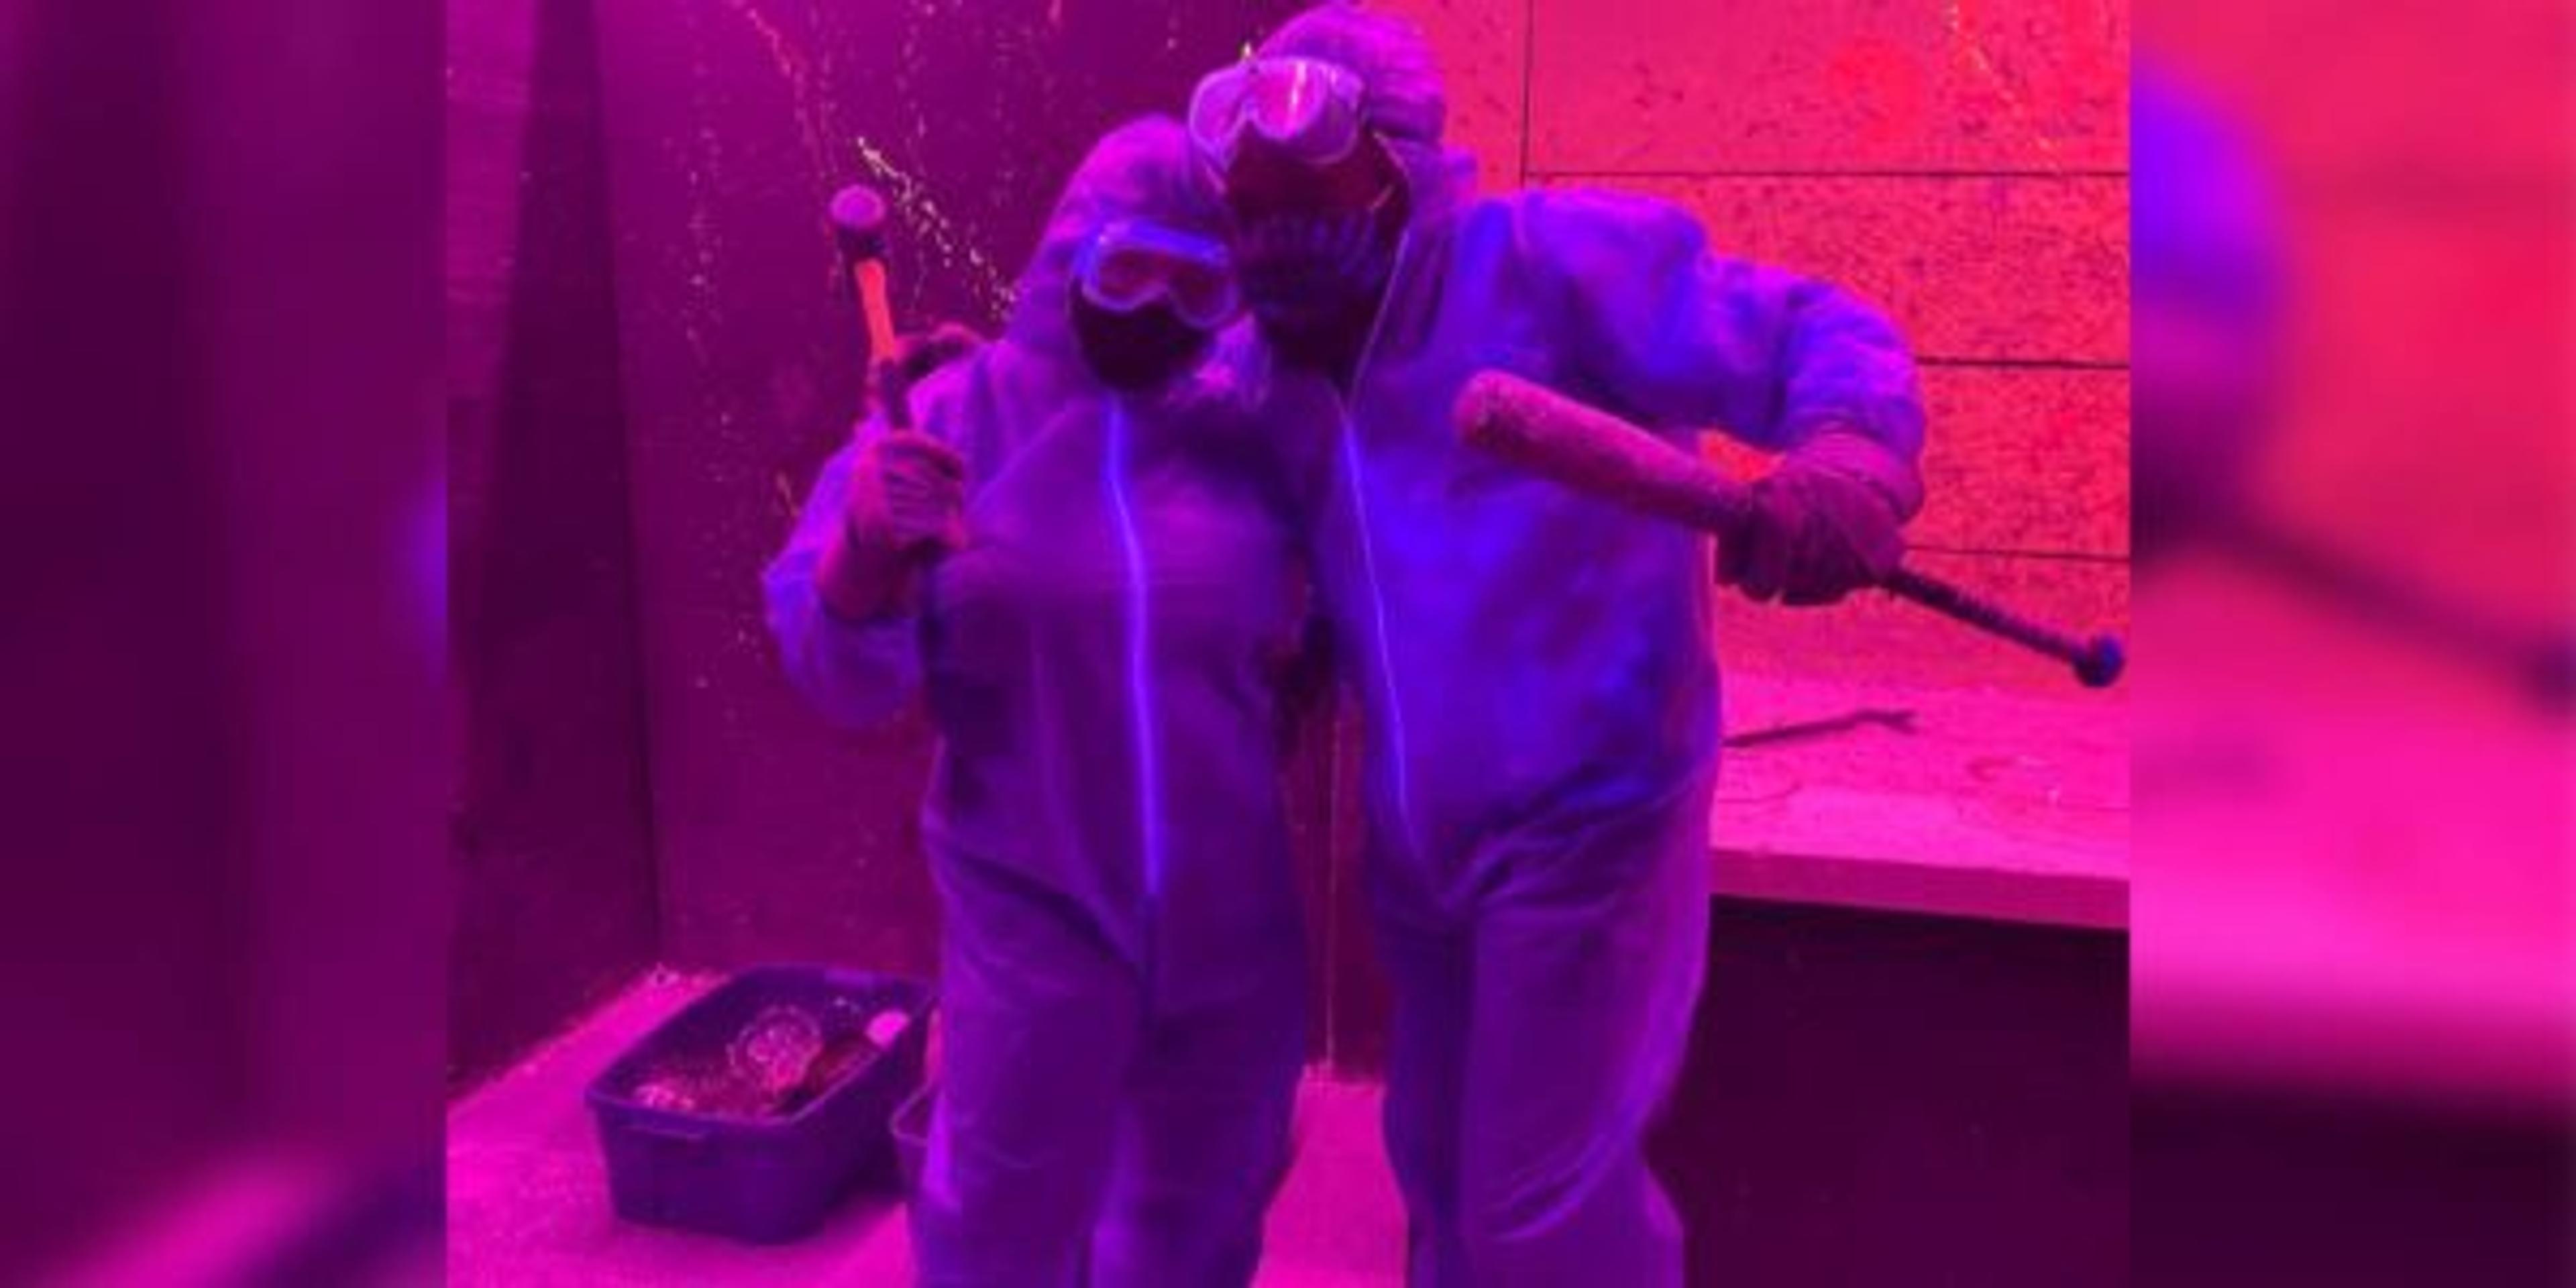 Two people in protective gear pose for a photo inside of a rage room.